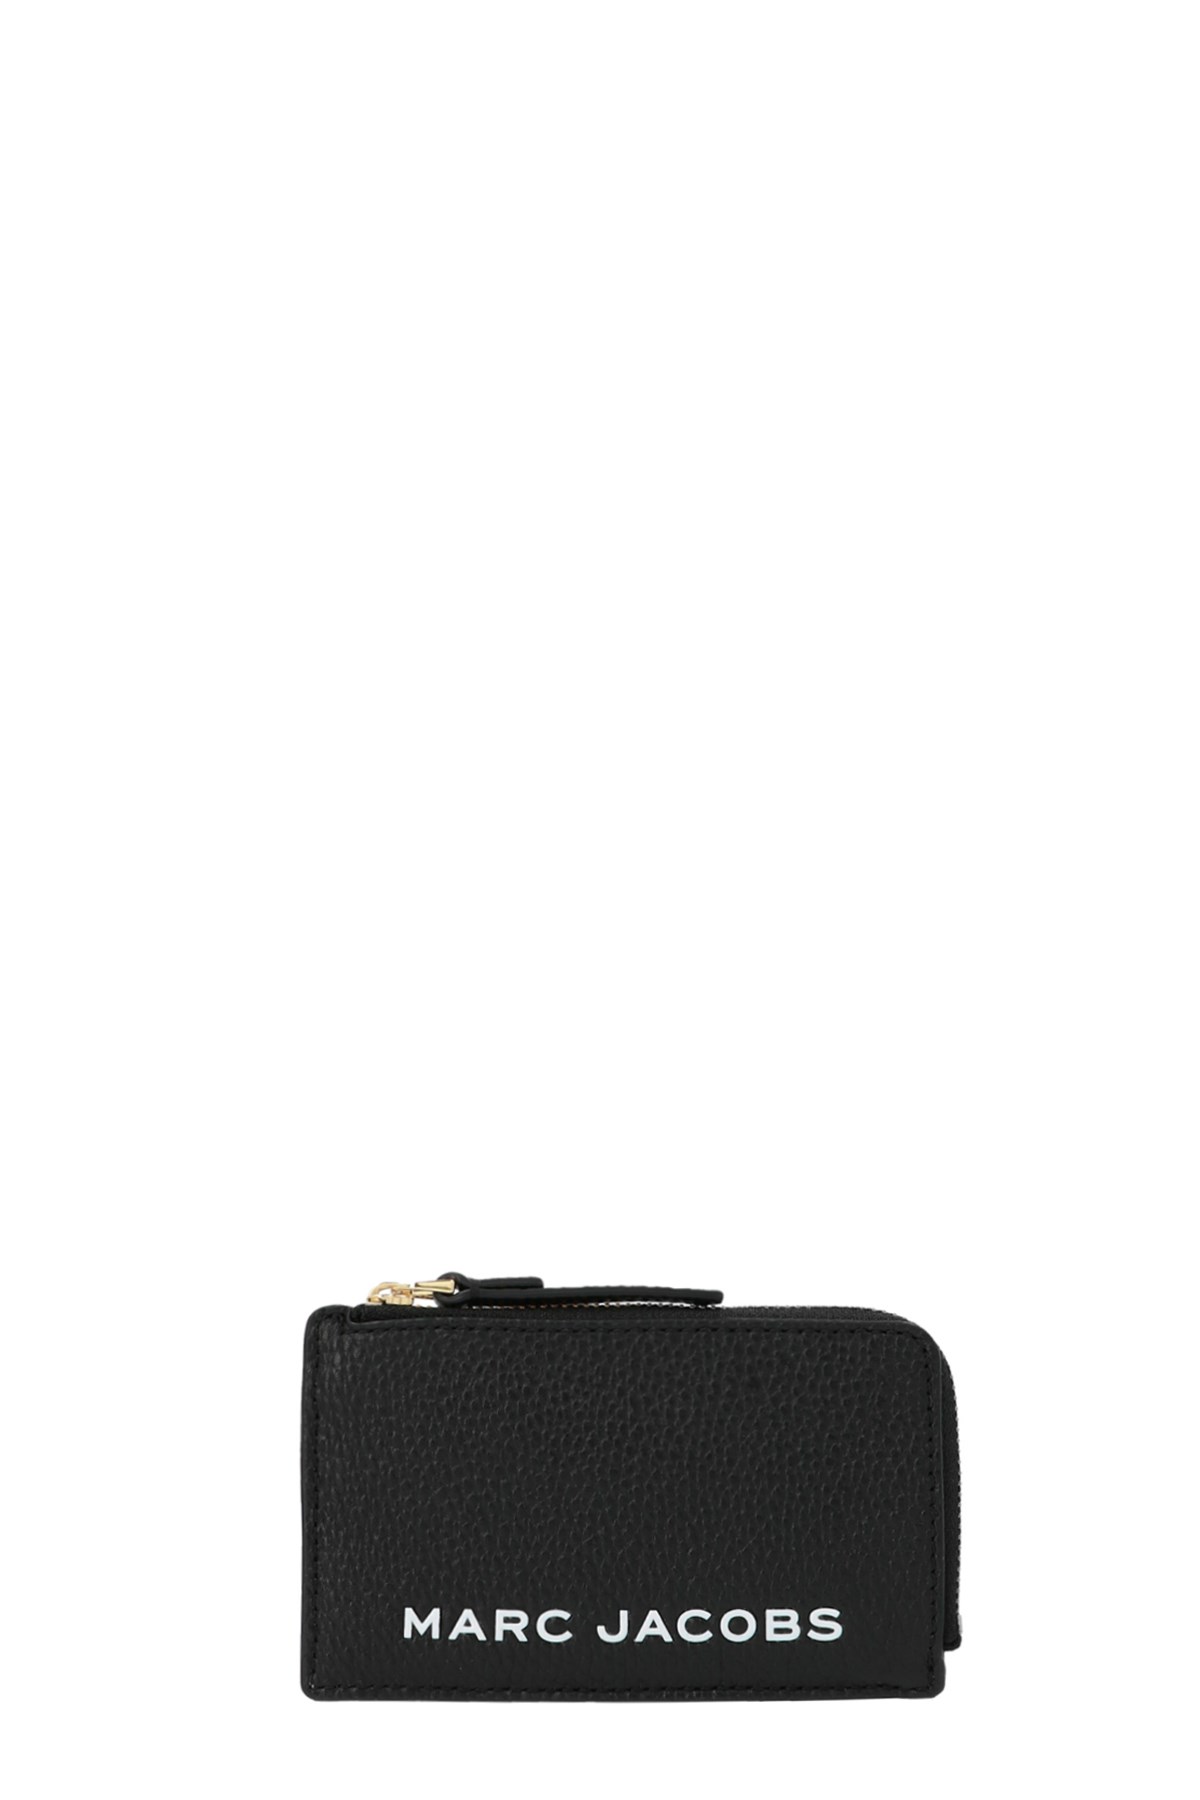 MARC JACOBS 'The Bold Small Top Zip Wallet’ Wallet